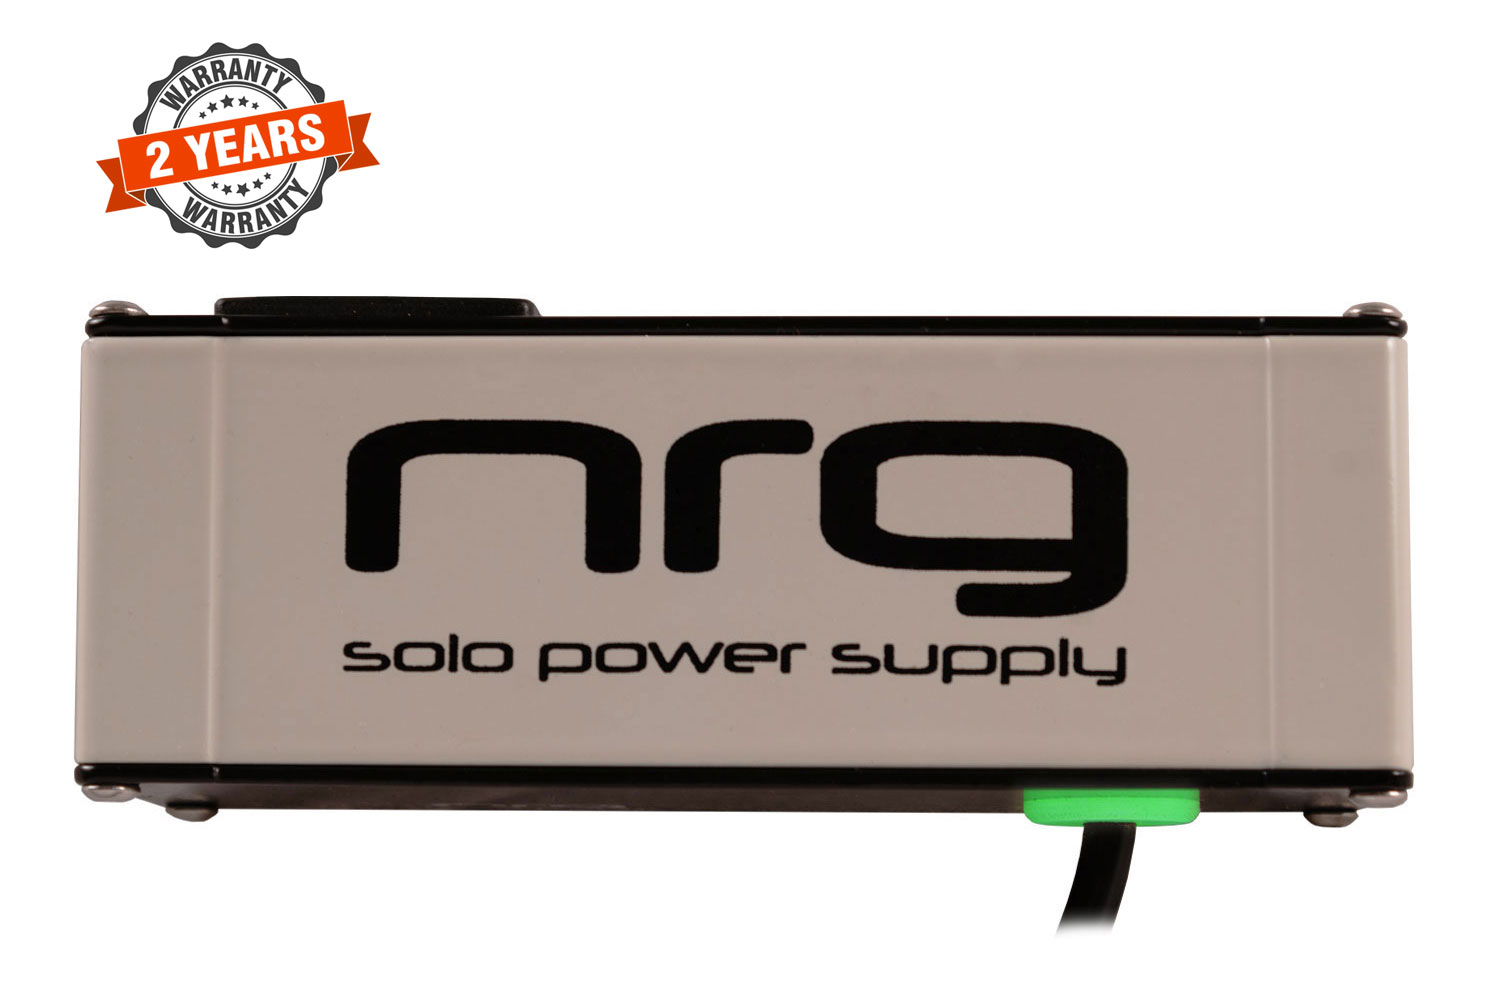 NRG Solo Power Supply – 12volts, 1.5amp, Center +ve Silver